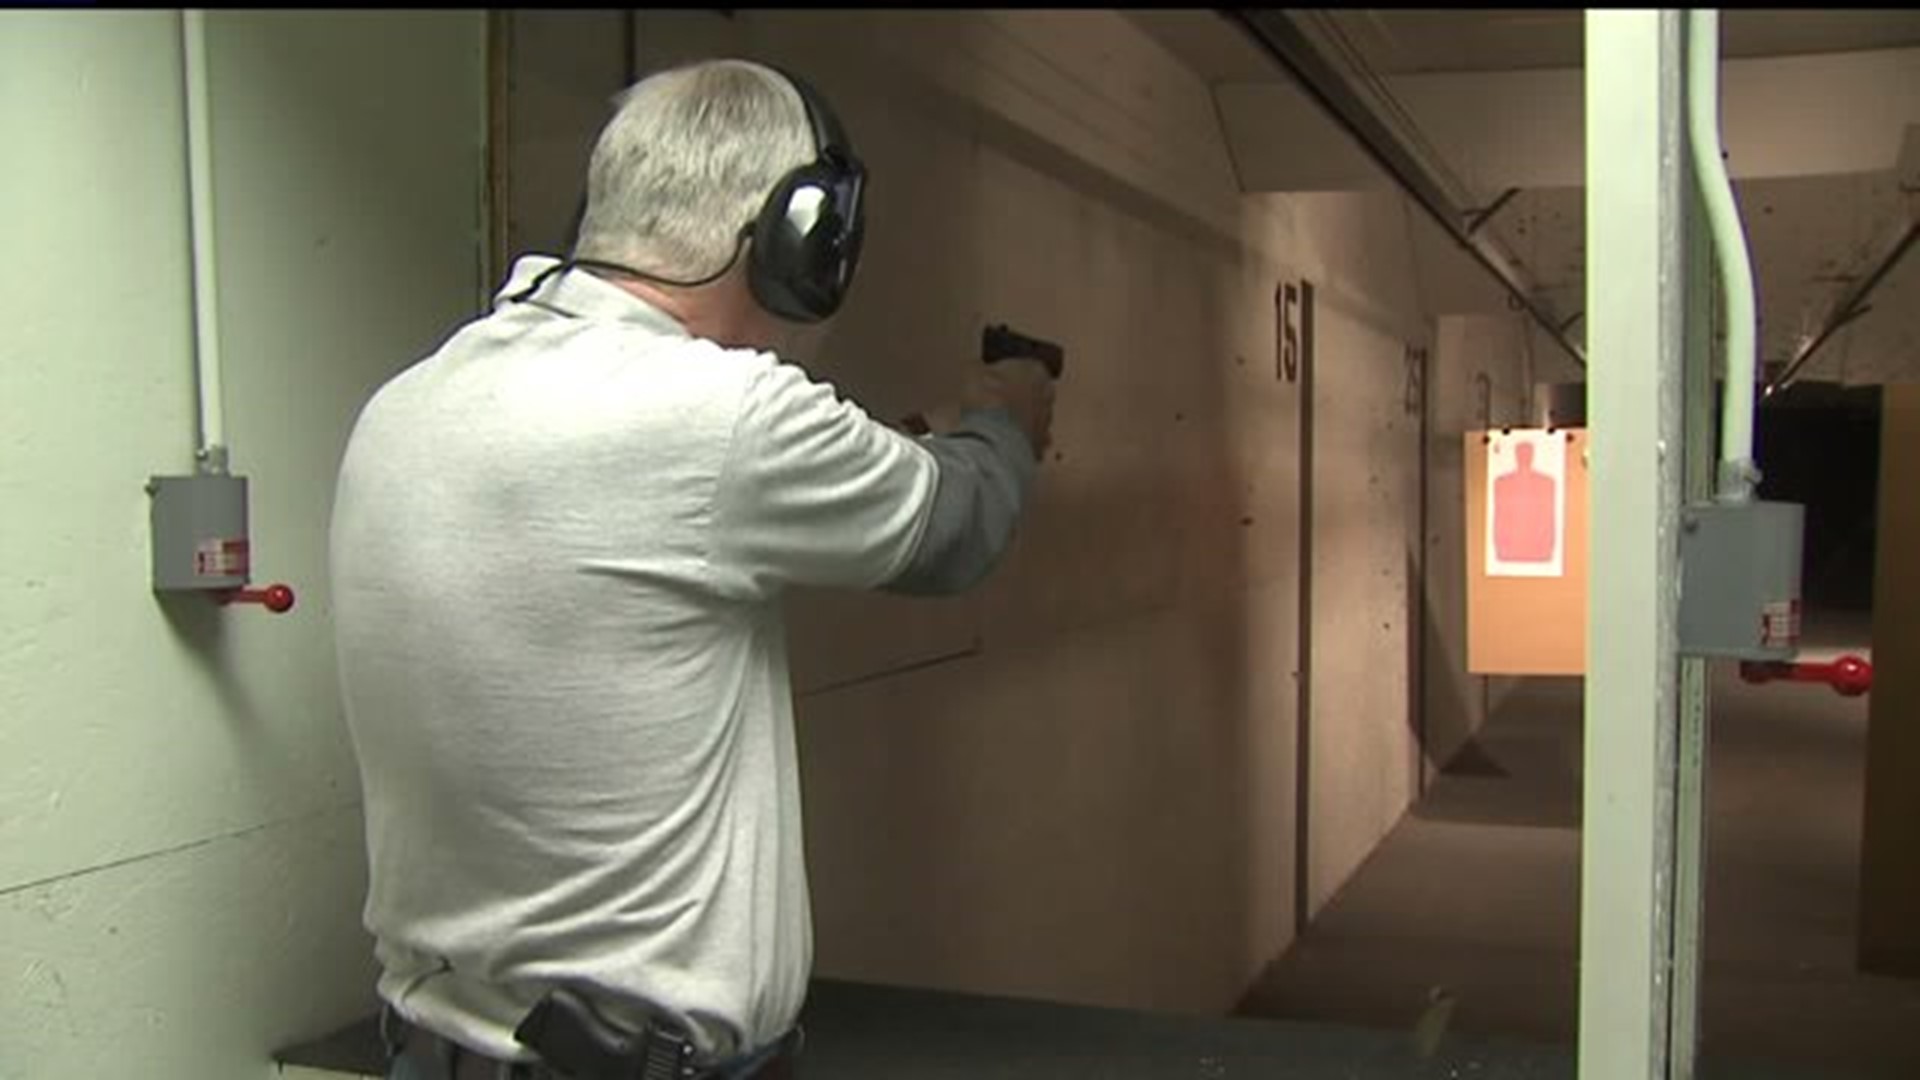 Local indoor shooting range owner sees pros and cons of suppressors